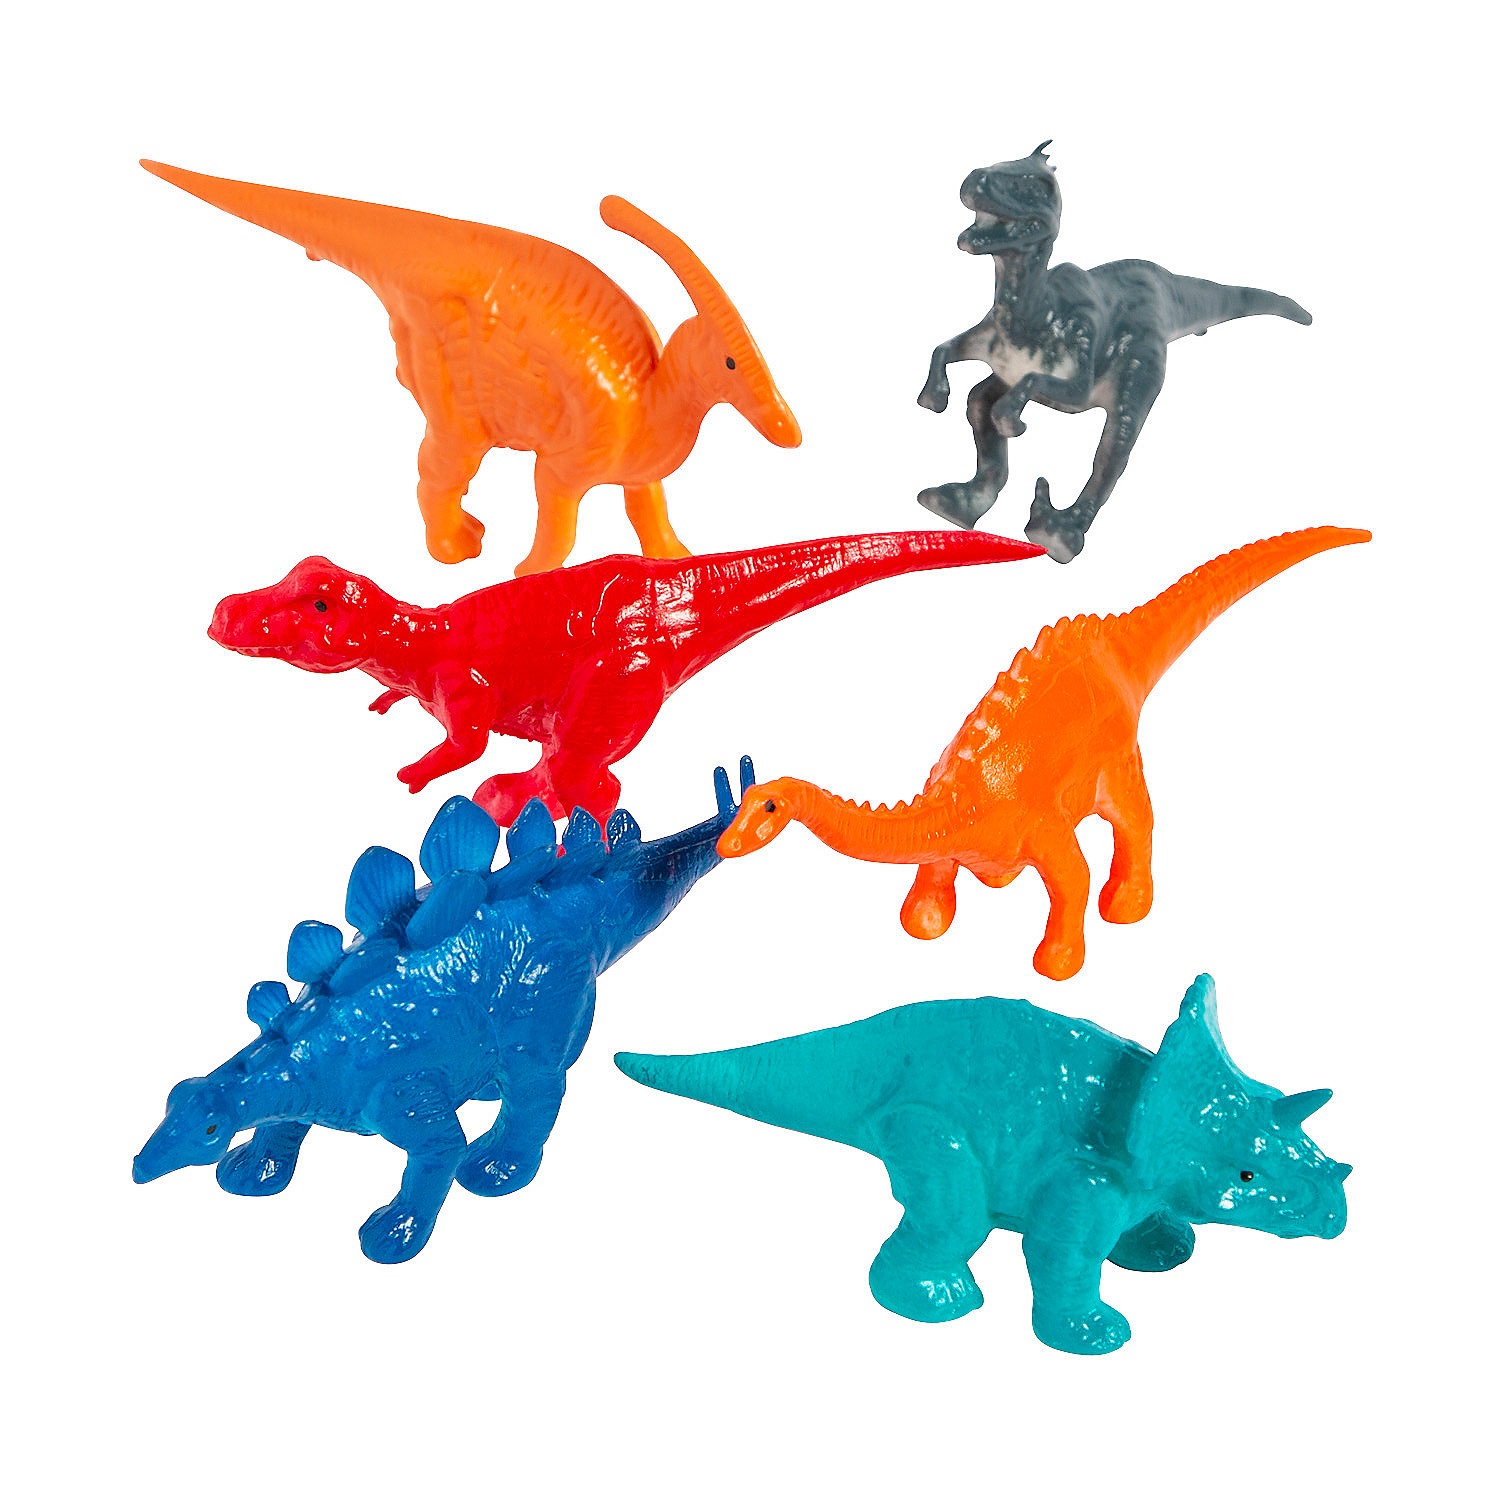 dinosaur-exchanges-12-pc-_13962381-a01